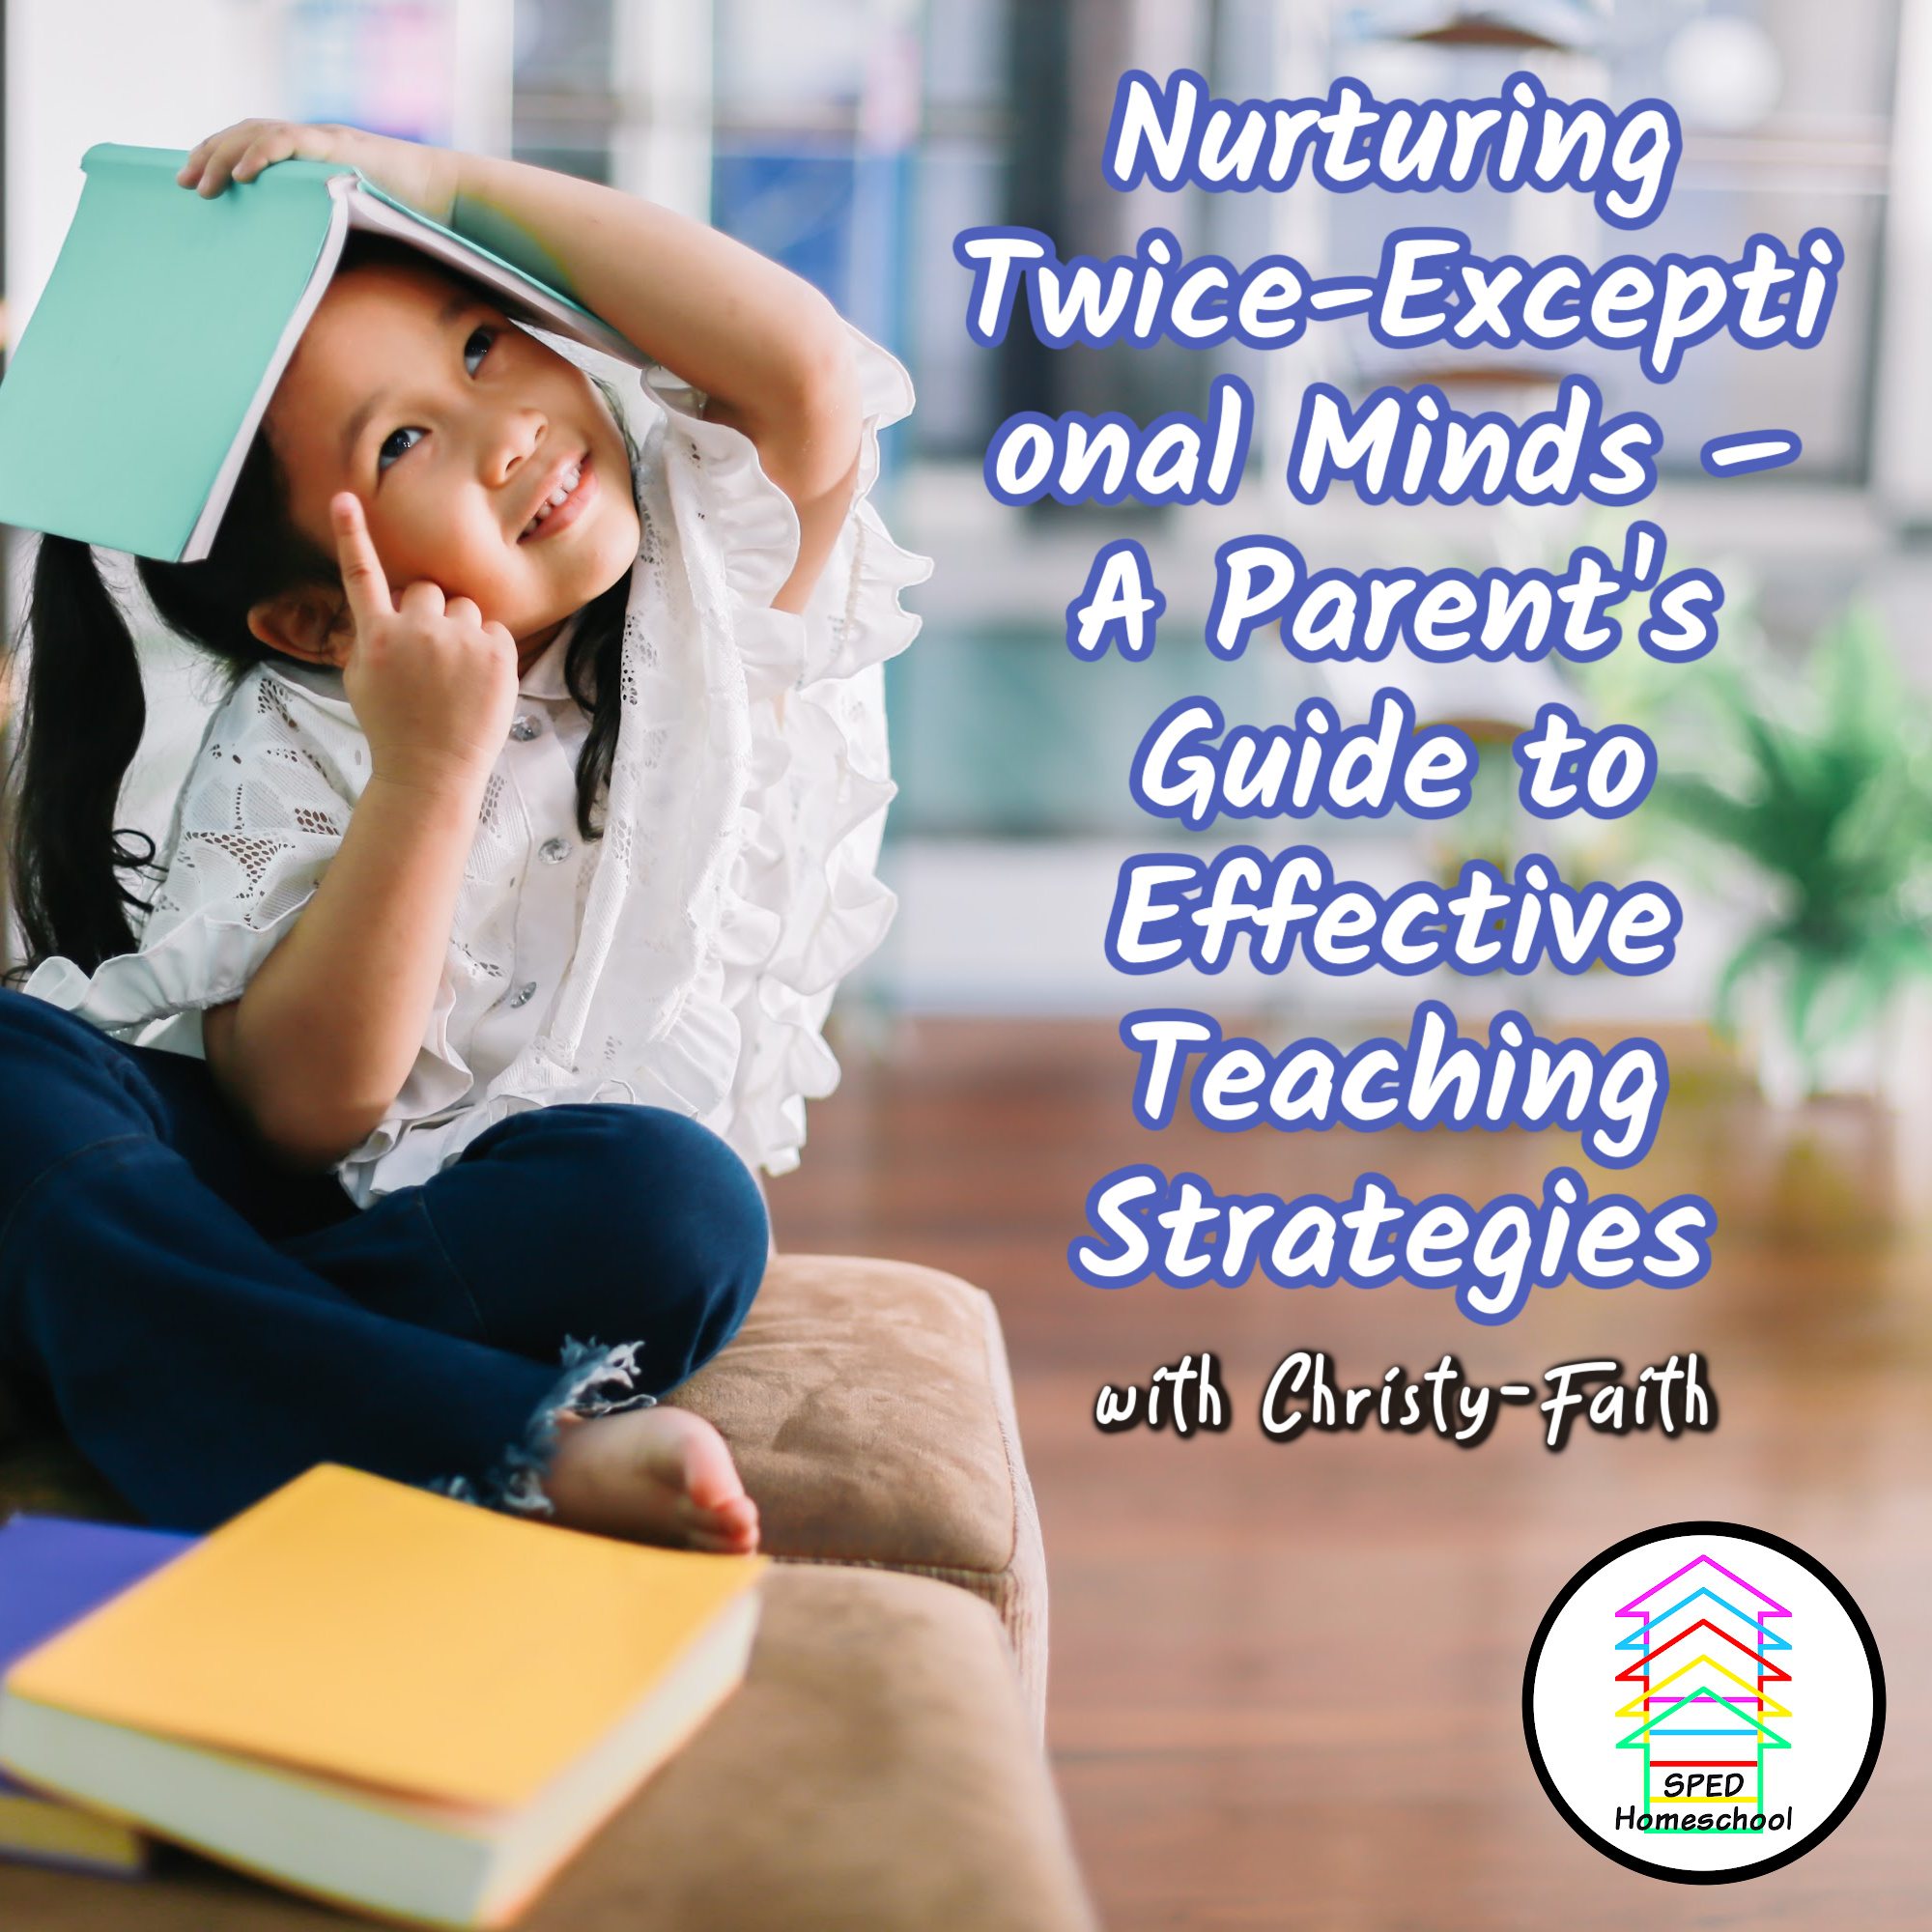 Nurturing Twice-Exceptional Minds – A Parent’s Guide to Effective Teaching Strategies